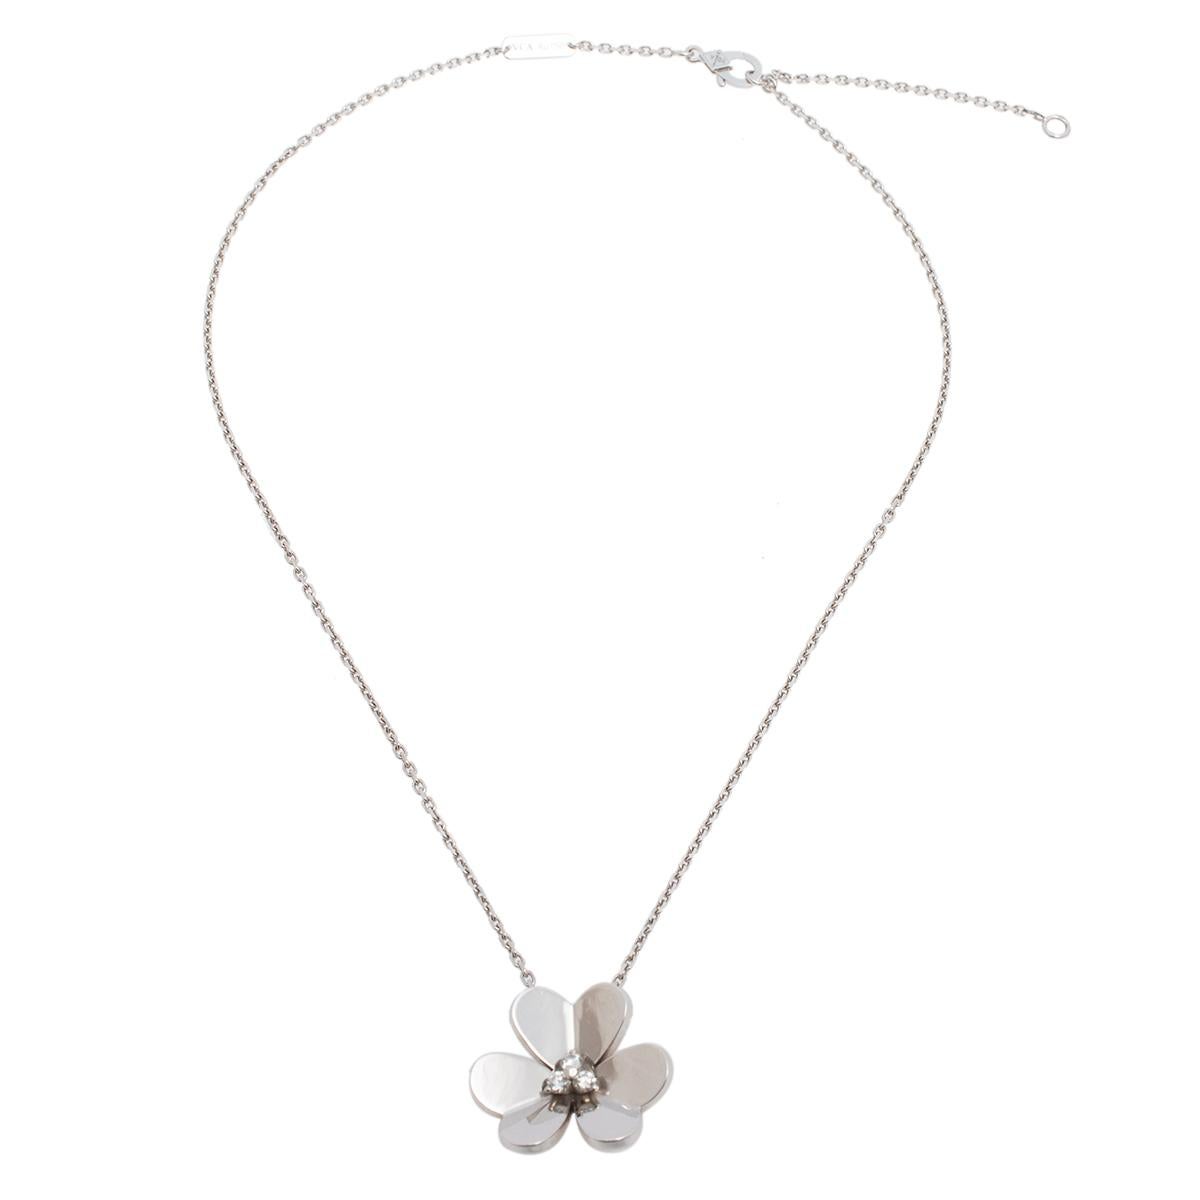 The Frivole from Van Cleef & Arpels is a collection that lays out the label's deft craftsmanship and genius of crafting unique jewelry pieces. Dignified and delicate, creations from this line embody the glow and lustre of florals. The Frivole